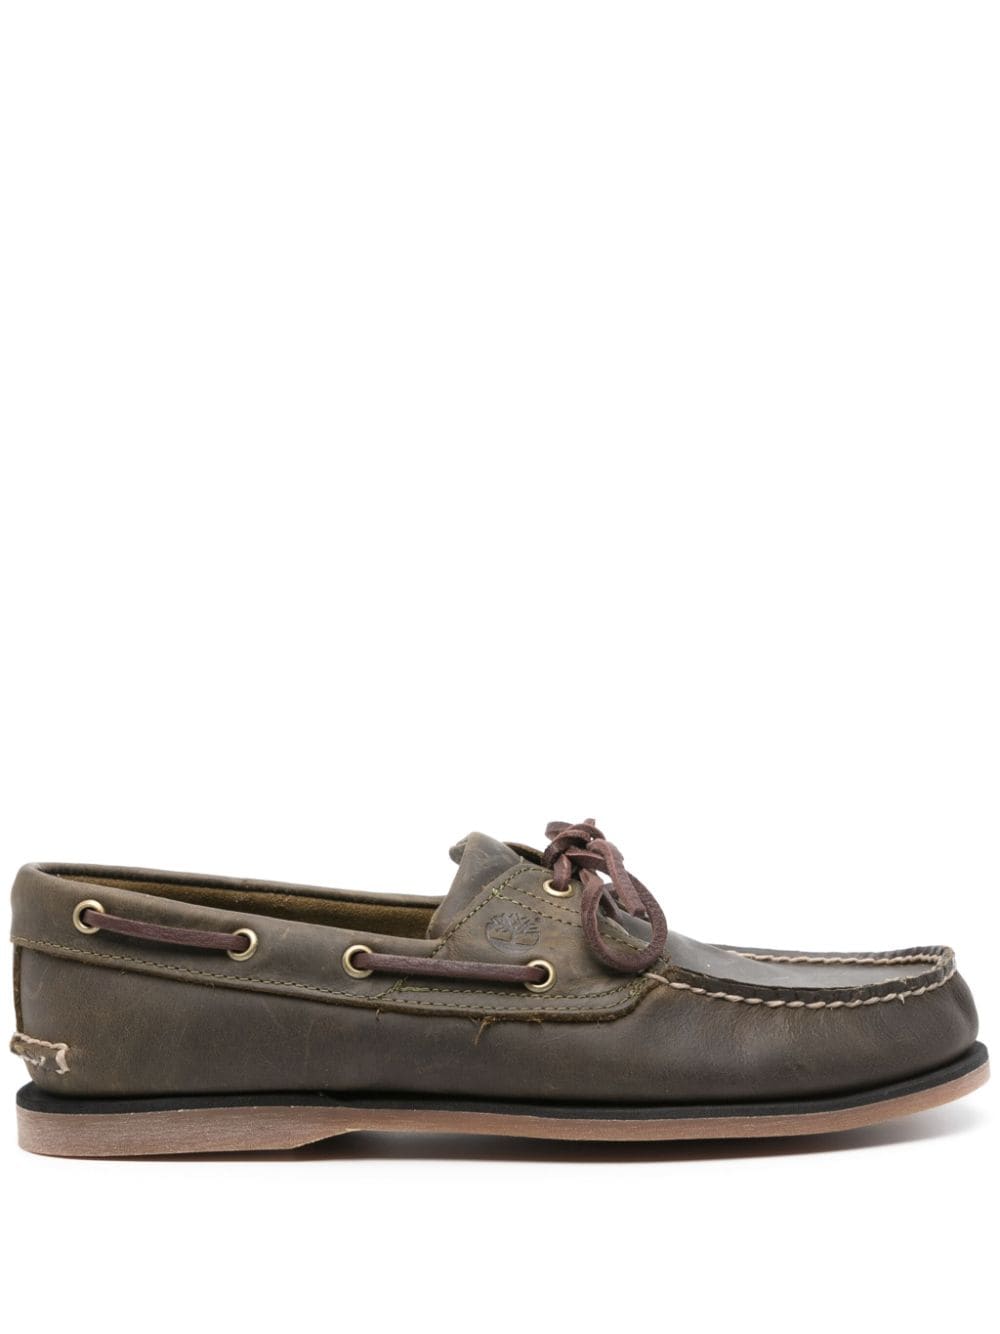 Timberland logo-embossed leather boat shoes - Green von Timberland